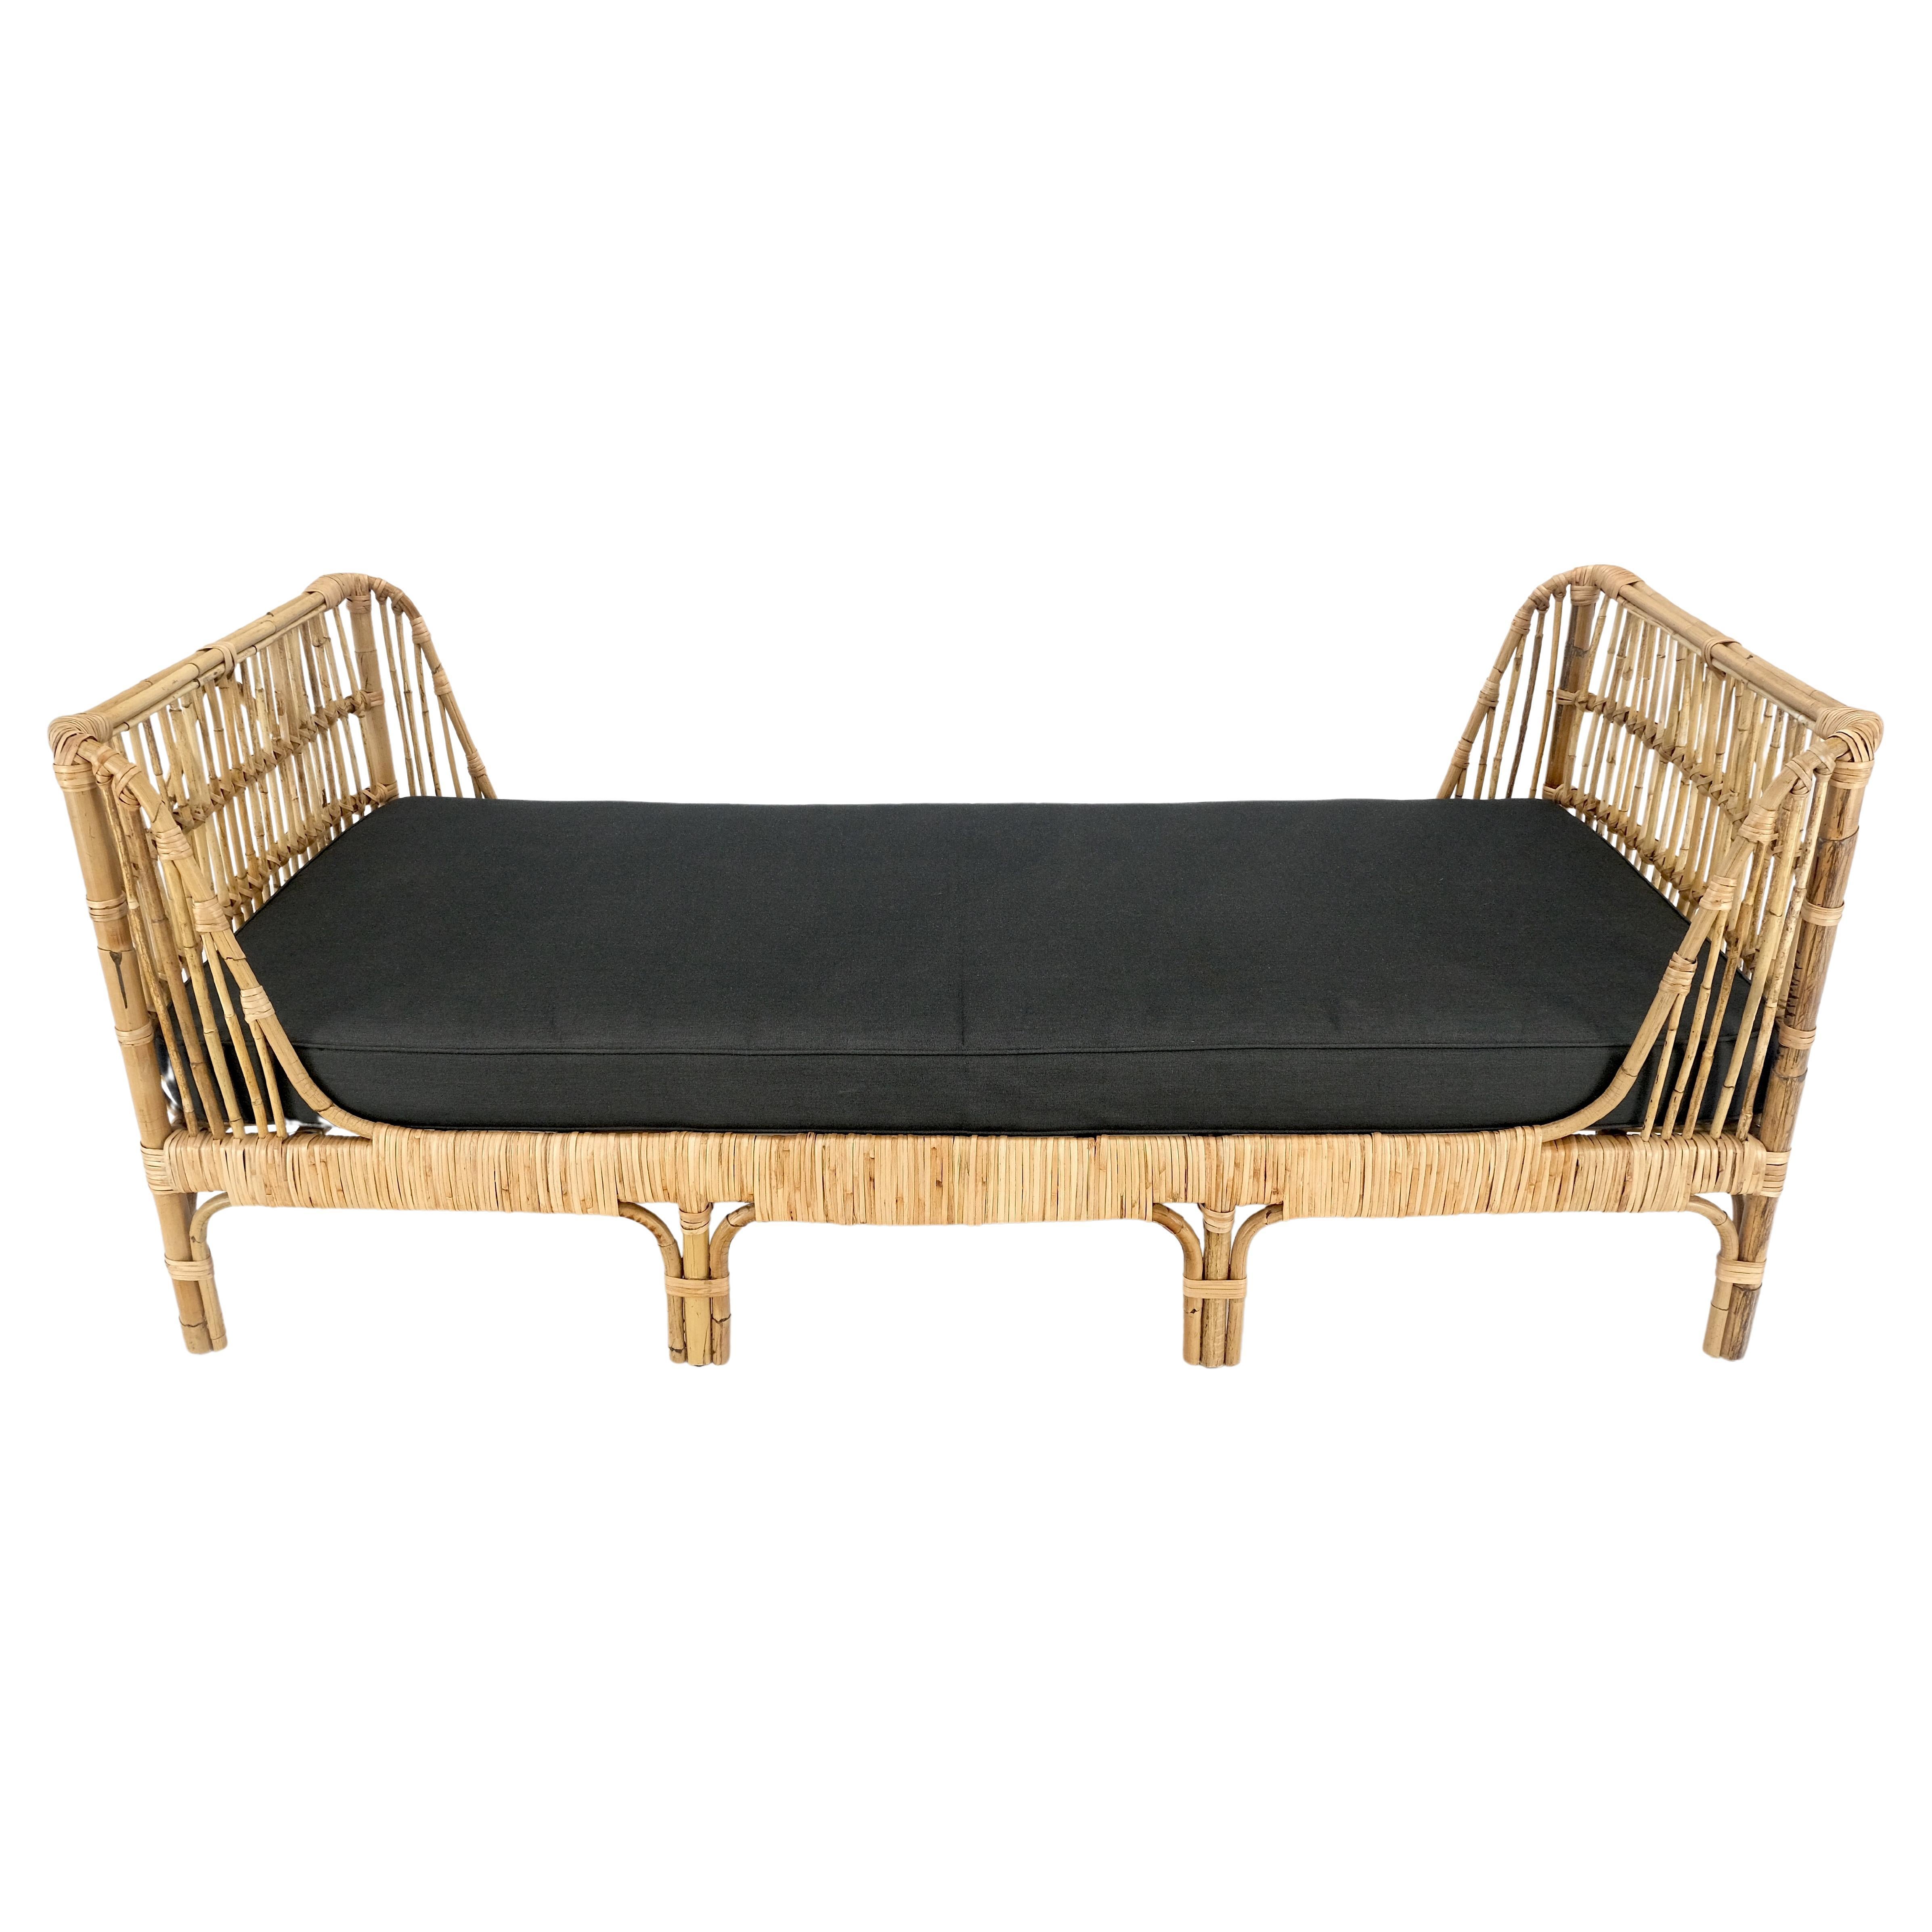 Rattan Bamboo Daybed Black Linen Cushion Mid Century Modern Style MINT